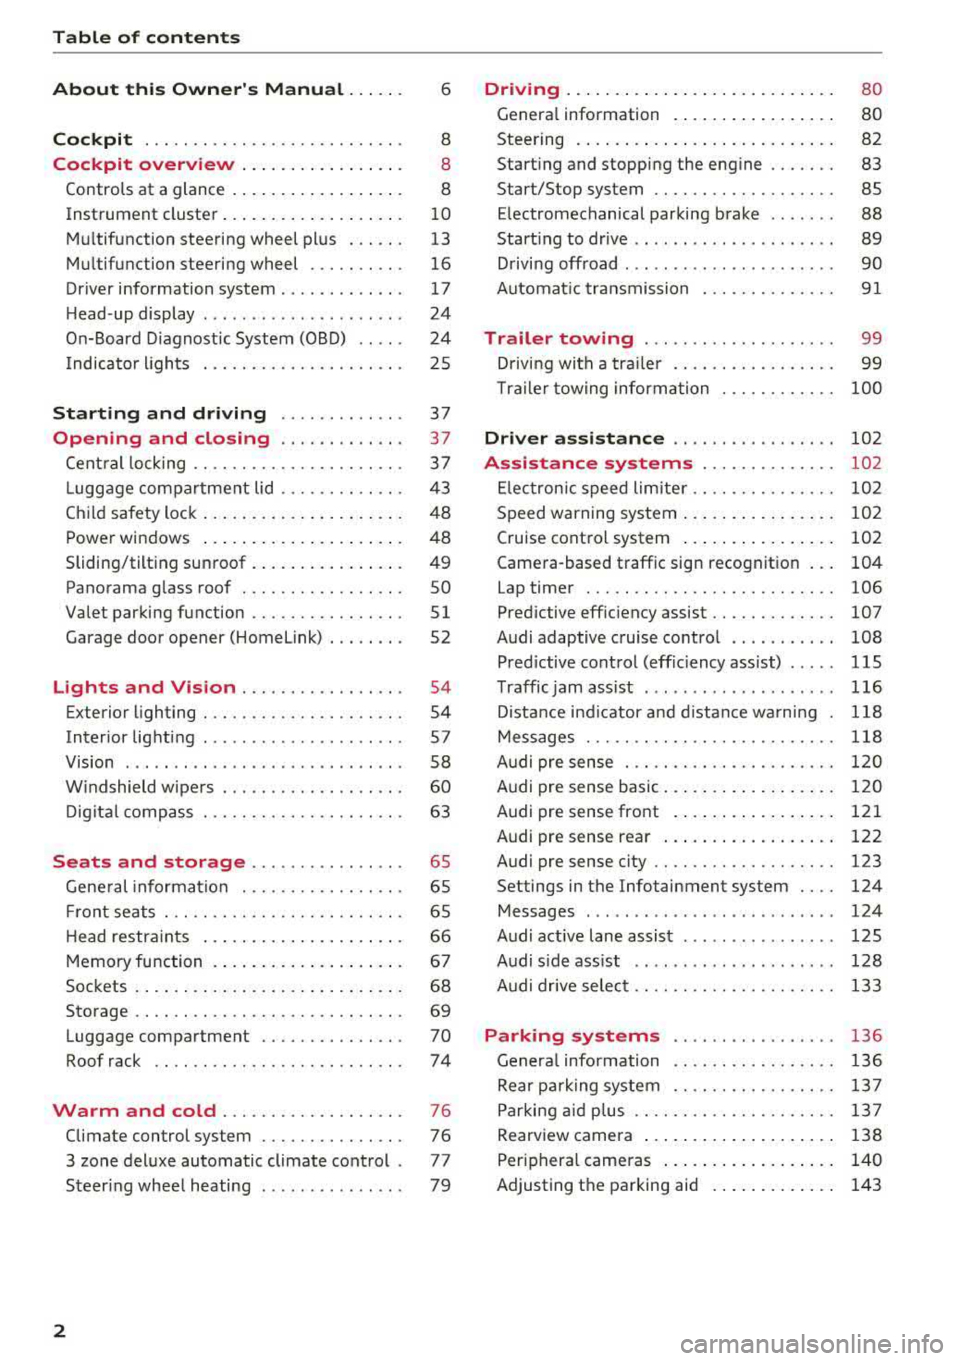 AUDI A4 2018  Owners Manual Table  of  contents  
About  this  Owners  Manual  . .. .. . 
Cockpit  ... .. ............... .... ..  . 
Cockpit  overview  ................ . 
Controls  at  a glance  ... .......... .. .. . 
Instru